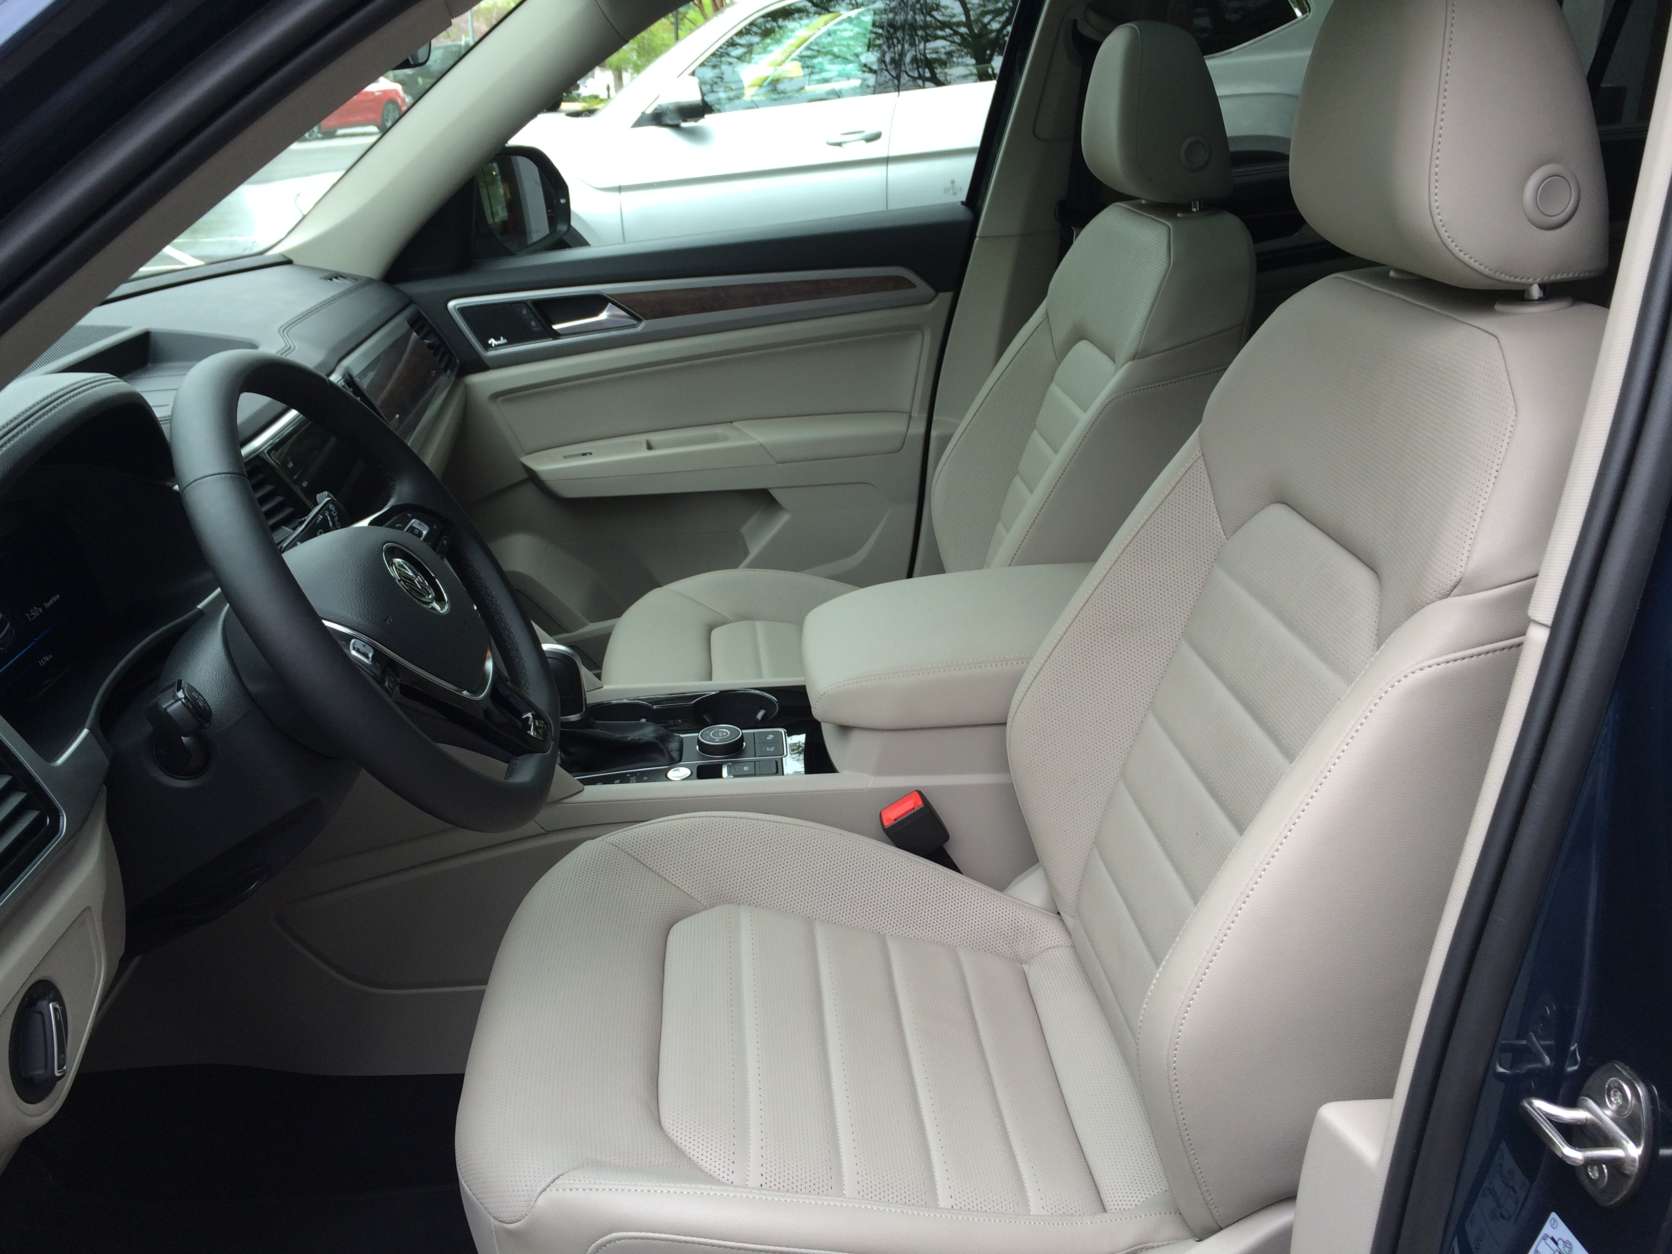 The interior is nicely laid out, with leather interior on the top-of-the-line SEL premium trim level. With this, you get heated and ventilated front seats that seem comfortable. (WTOP/Mike Parris)